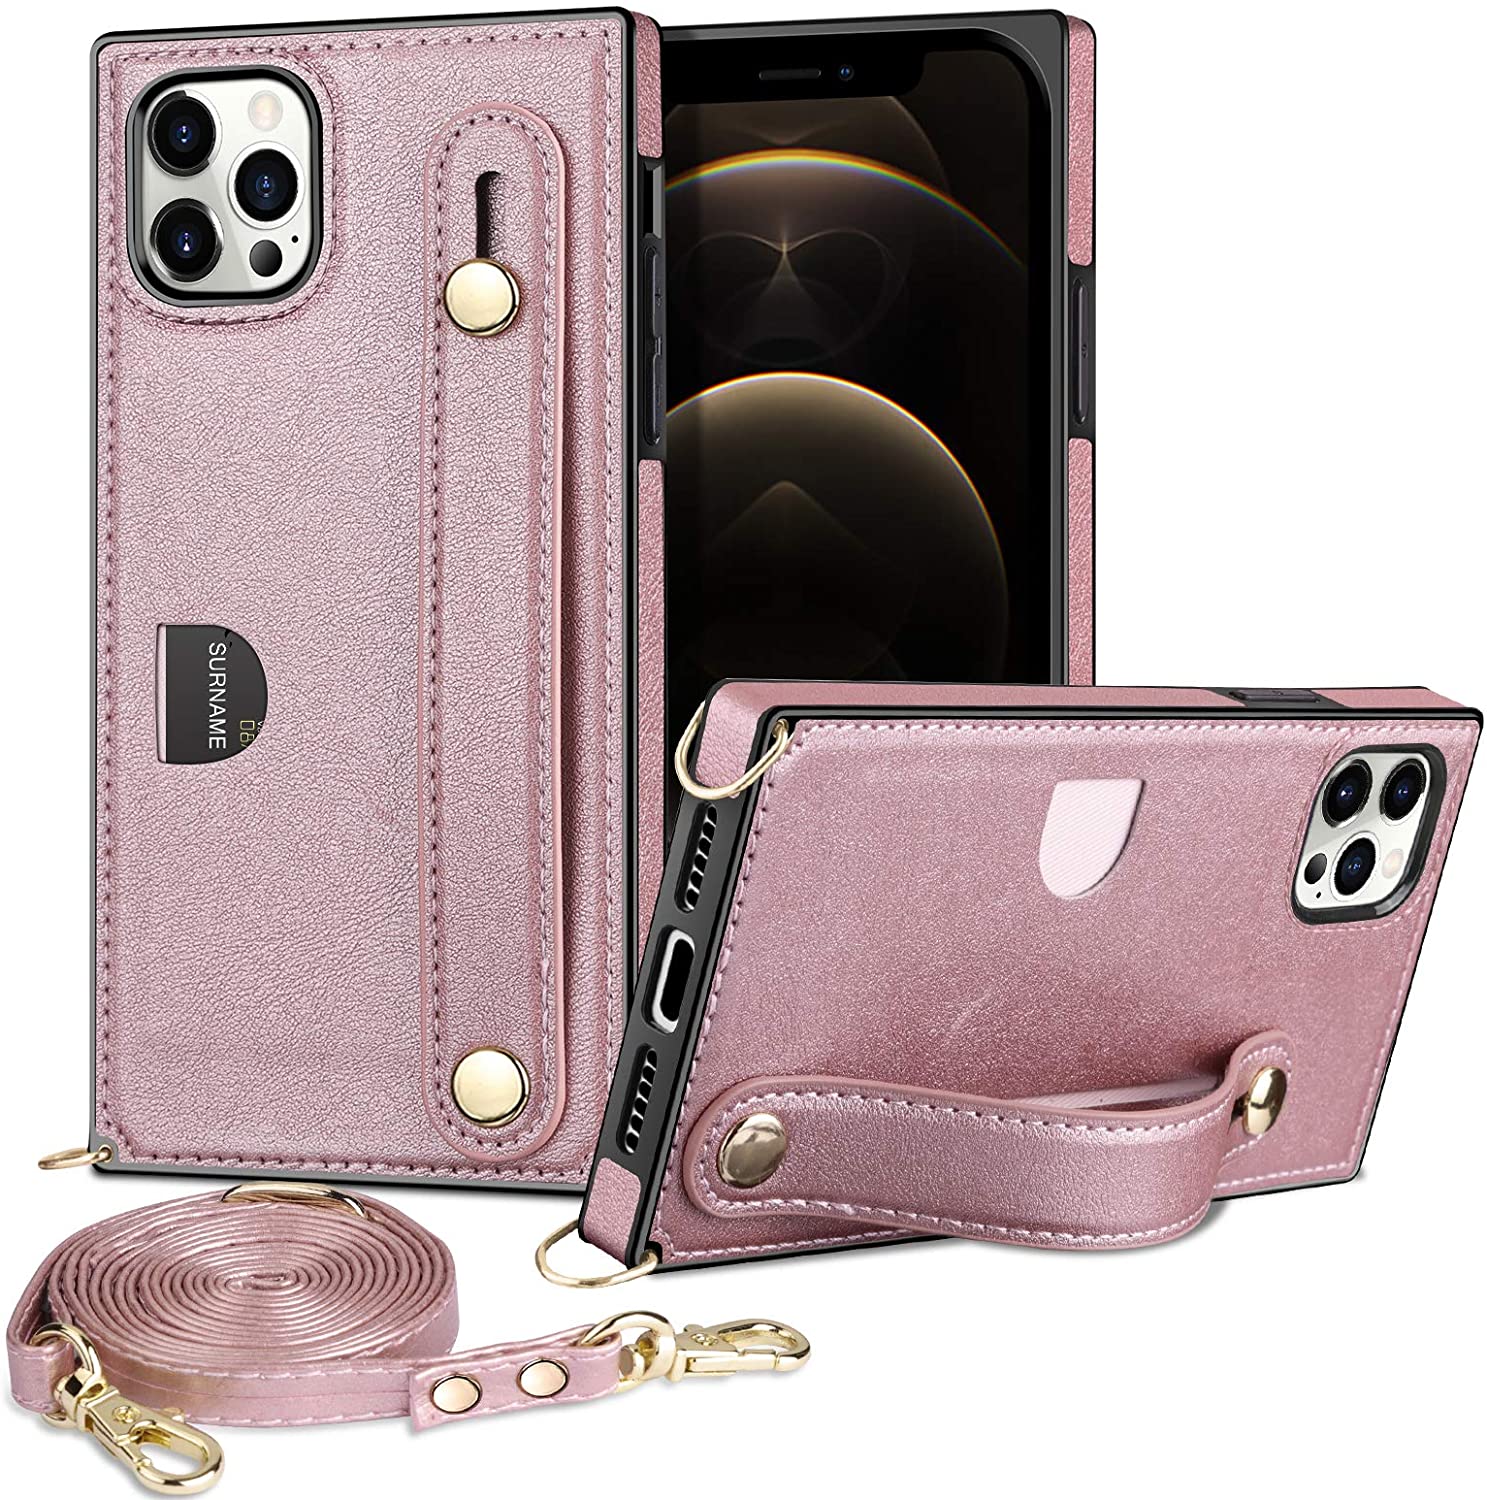 Compatible with iPhone 12 Pro Max Case-Wallet Case with Card Holder Kickstand Lanyard Neck Strap Adjustable Necklace Protective Cover Compatible with iPhone 12 Pro Max 6.7 inch 5G Rose Gold - image 1 of 3